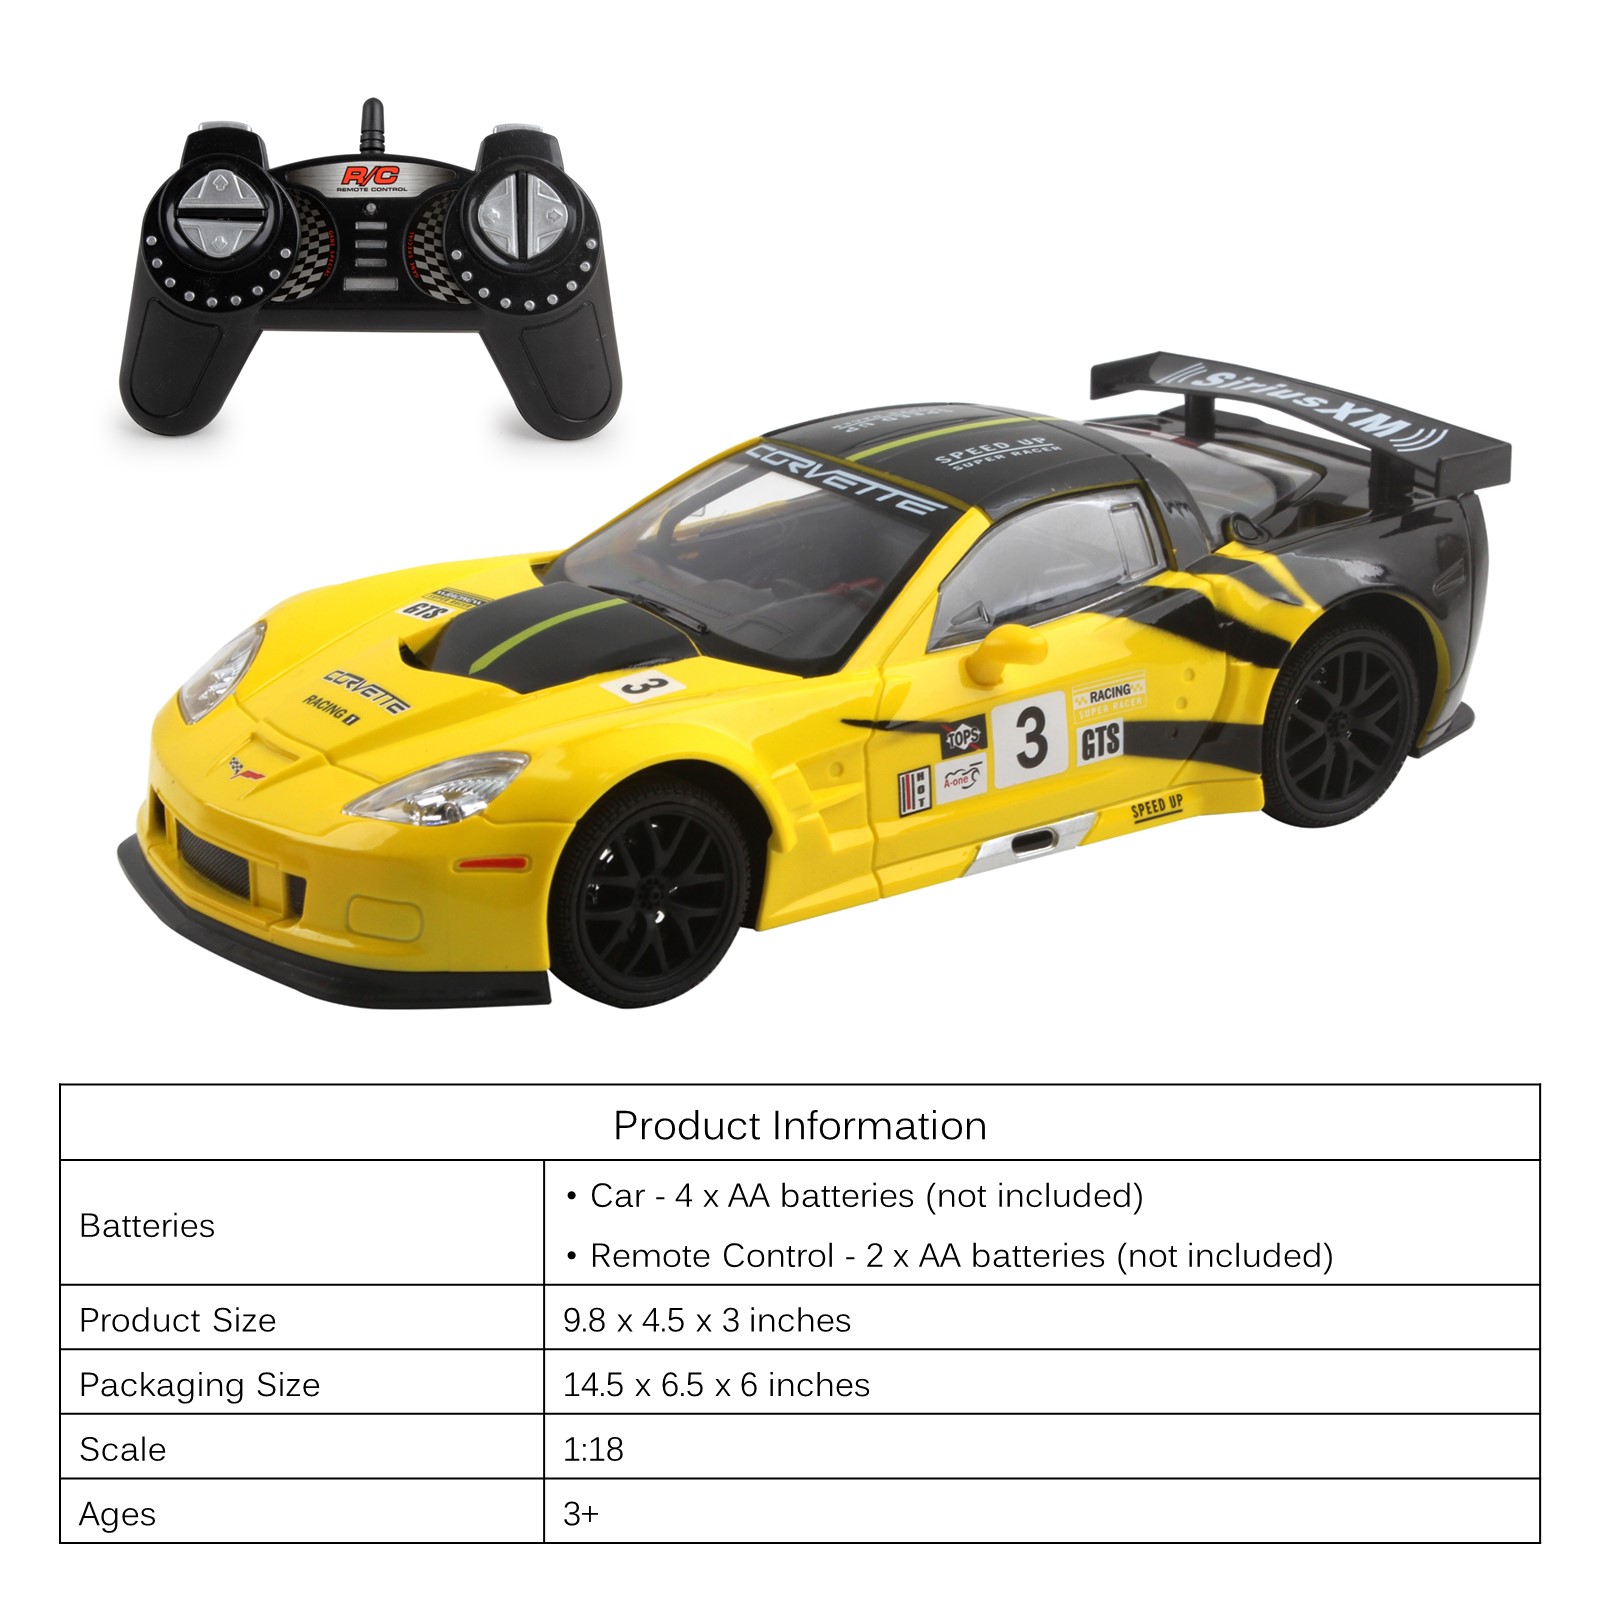 Vokodo RC Super Car 1:18 Scale Remote Control Full Function Corvette with Working LED Headlights Easy to Operate Kids Toy Race Vehicle Perfect Exotic Sports Model Great Gift for Children Boys Girls TL-85